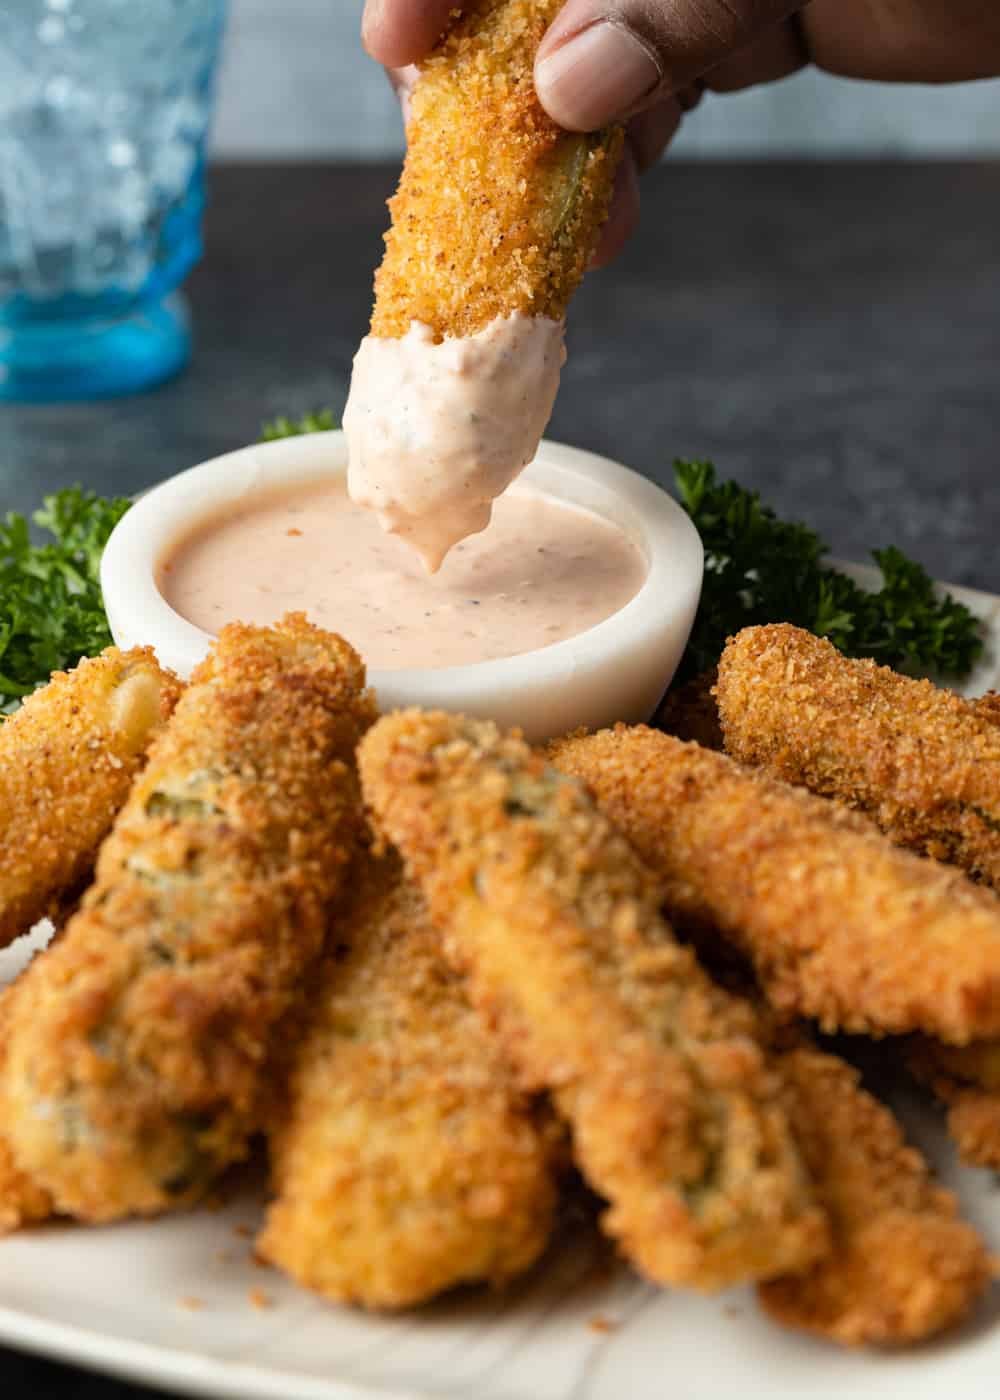 dipping fried pickle spears into dipping sauce